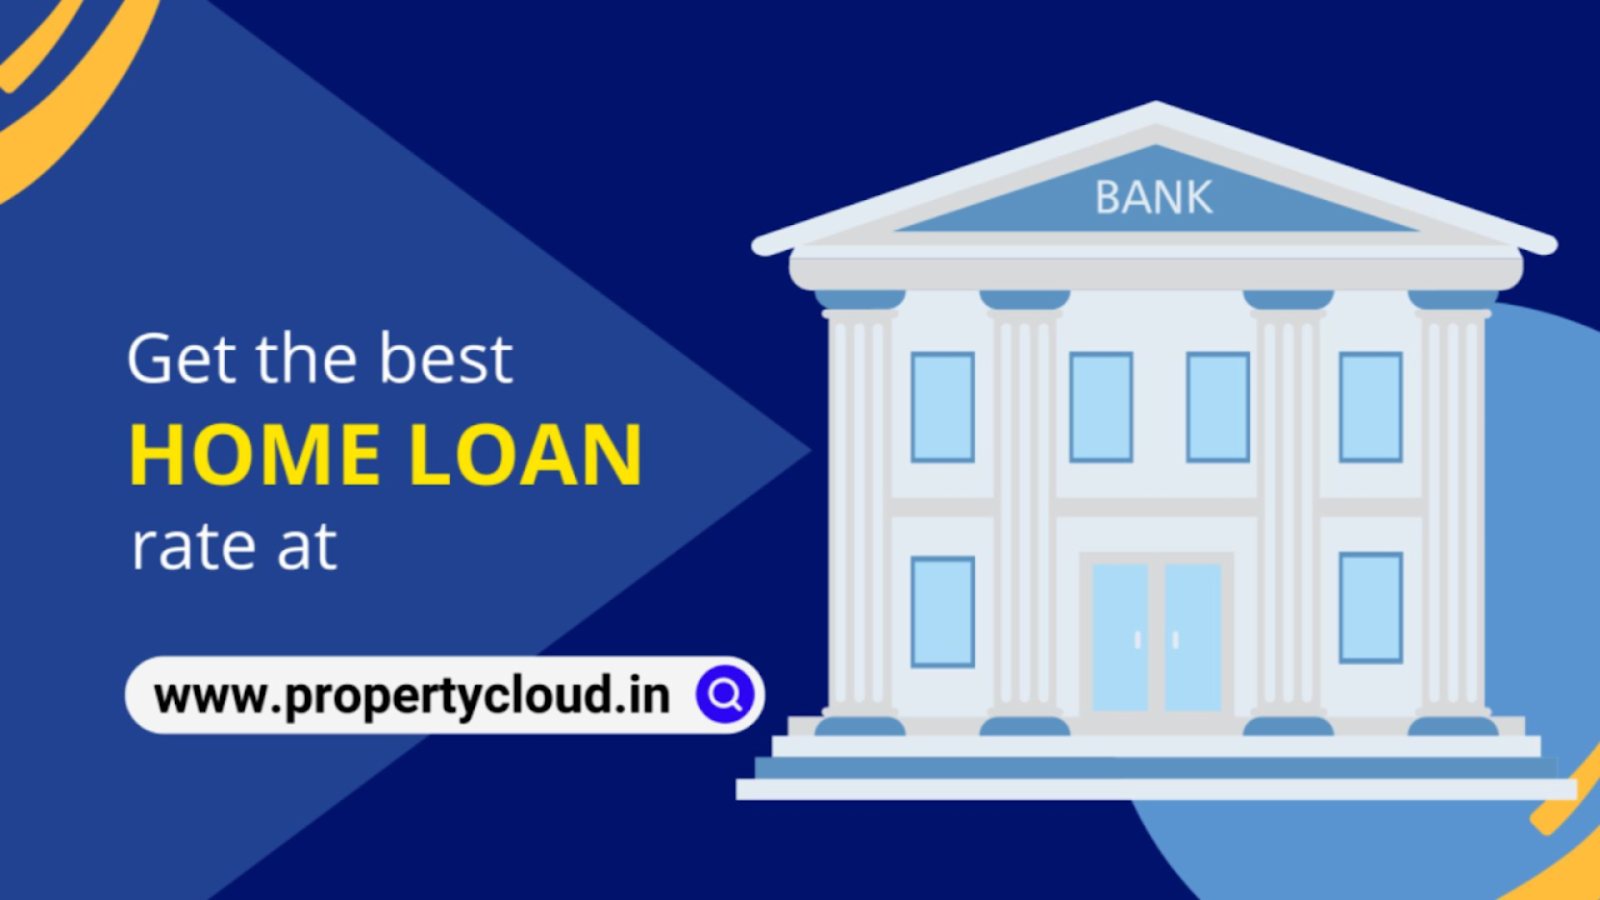 Get in touch with PropertyCloud, to get the best advice related to home loans at the best rate of interest